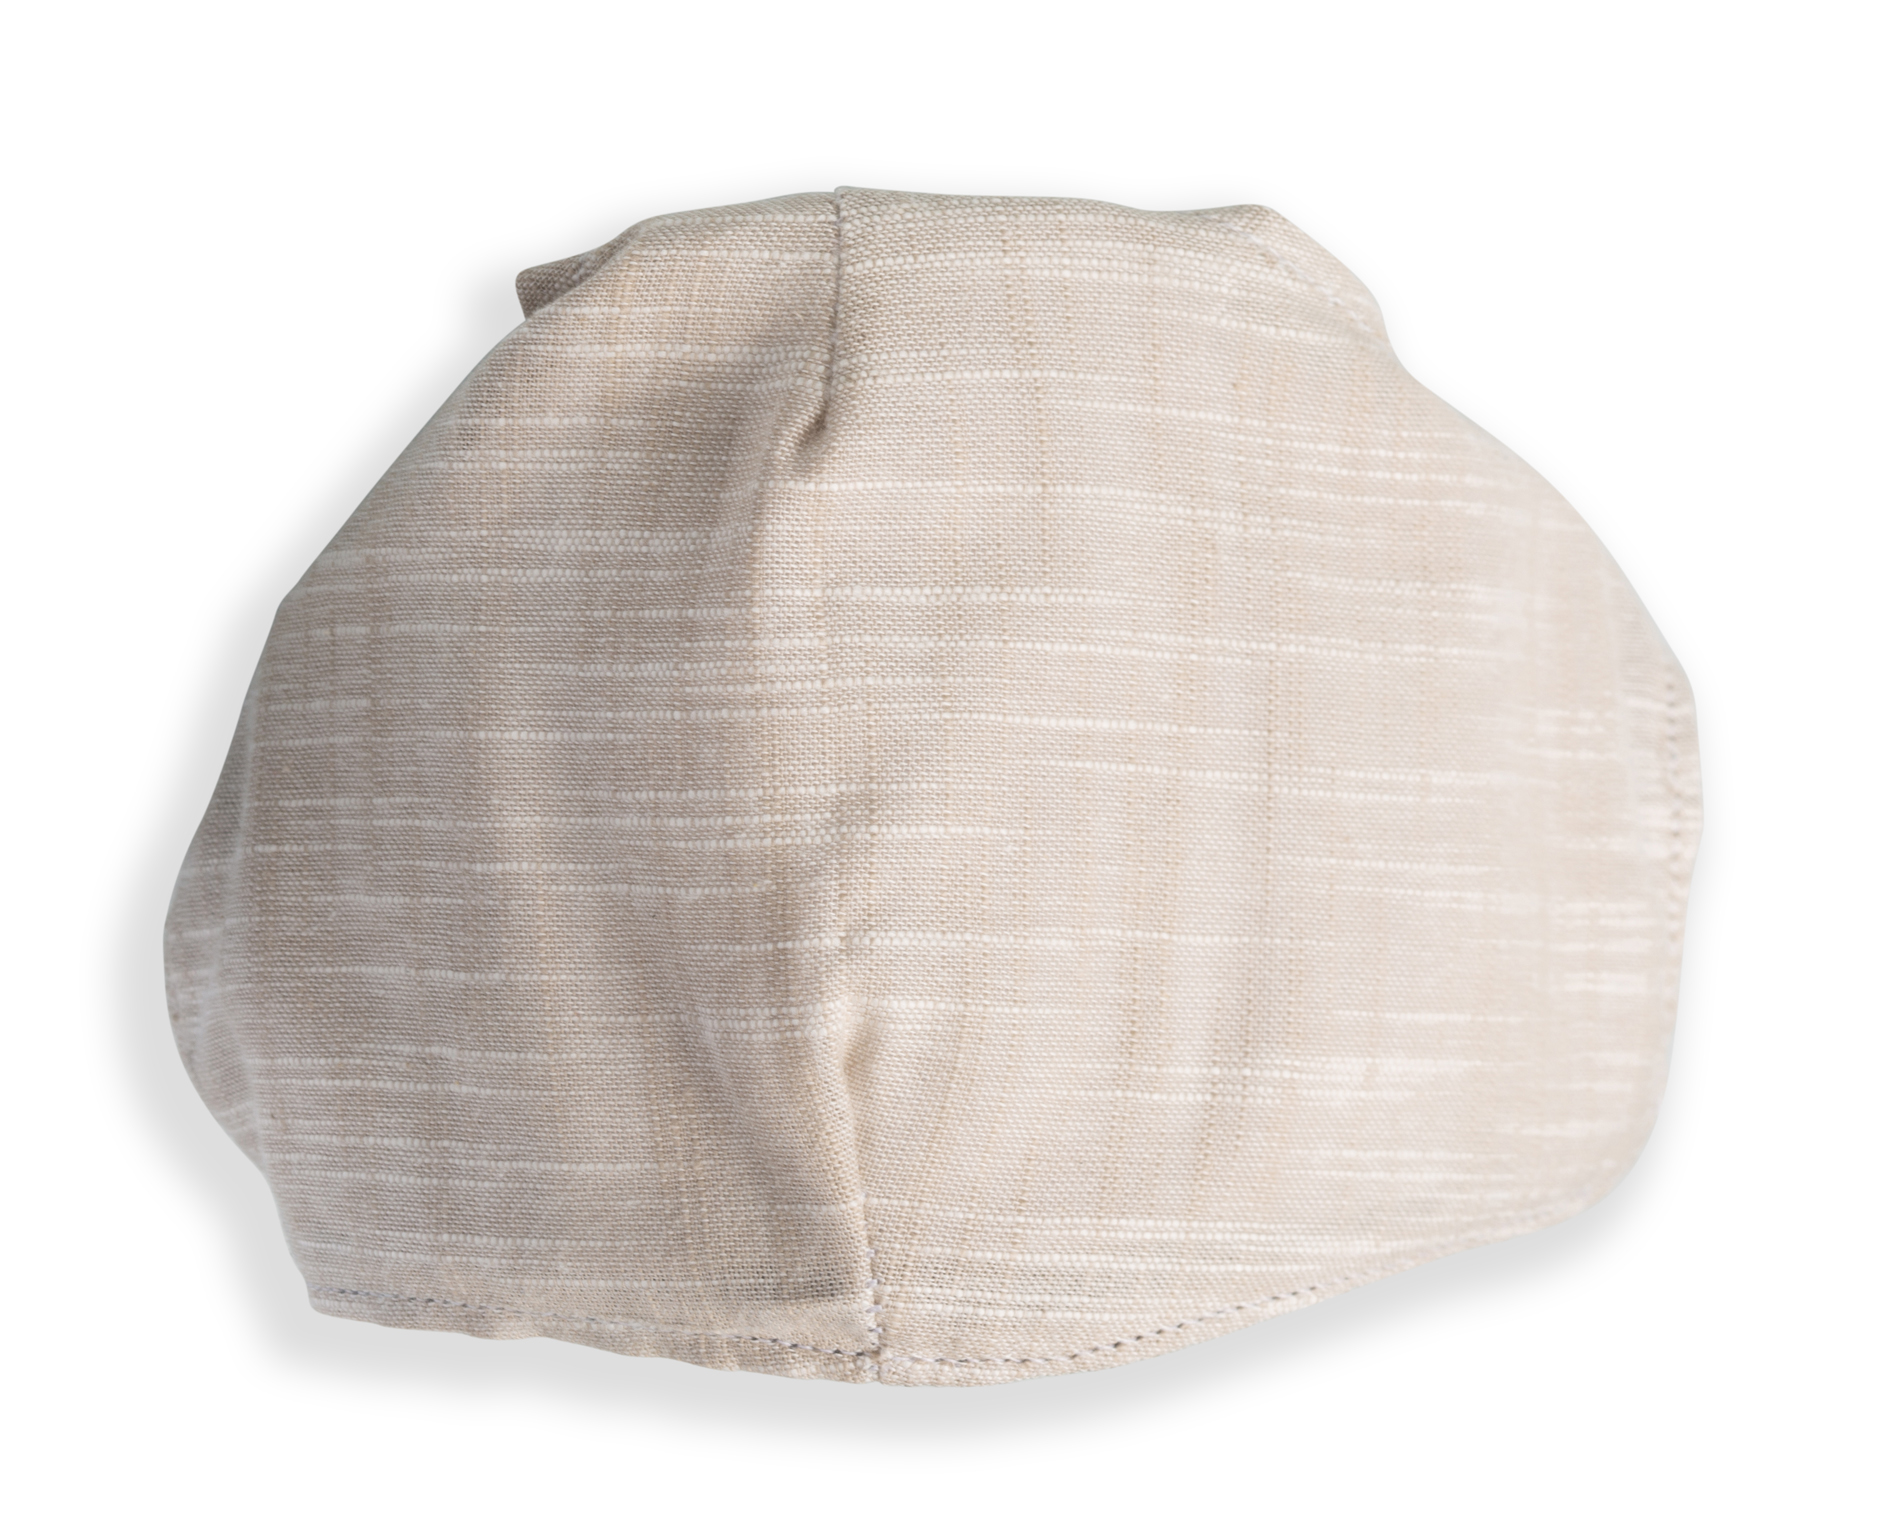 Reusable and Washable Face Mask in Taupe Style-MSK-TAU-NF